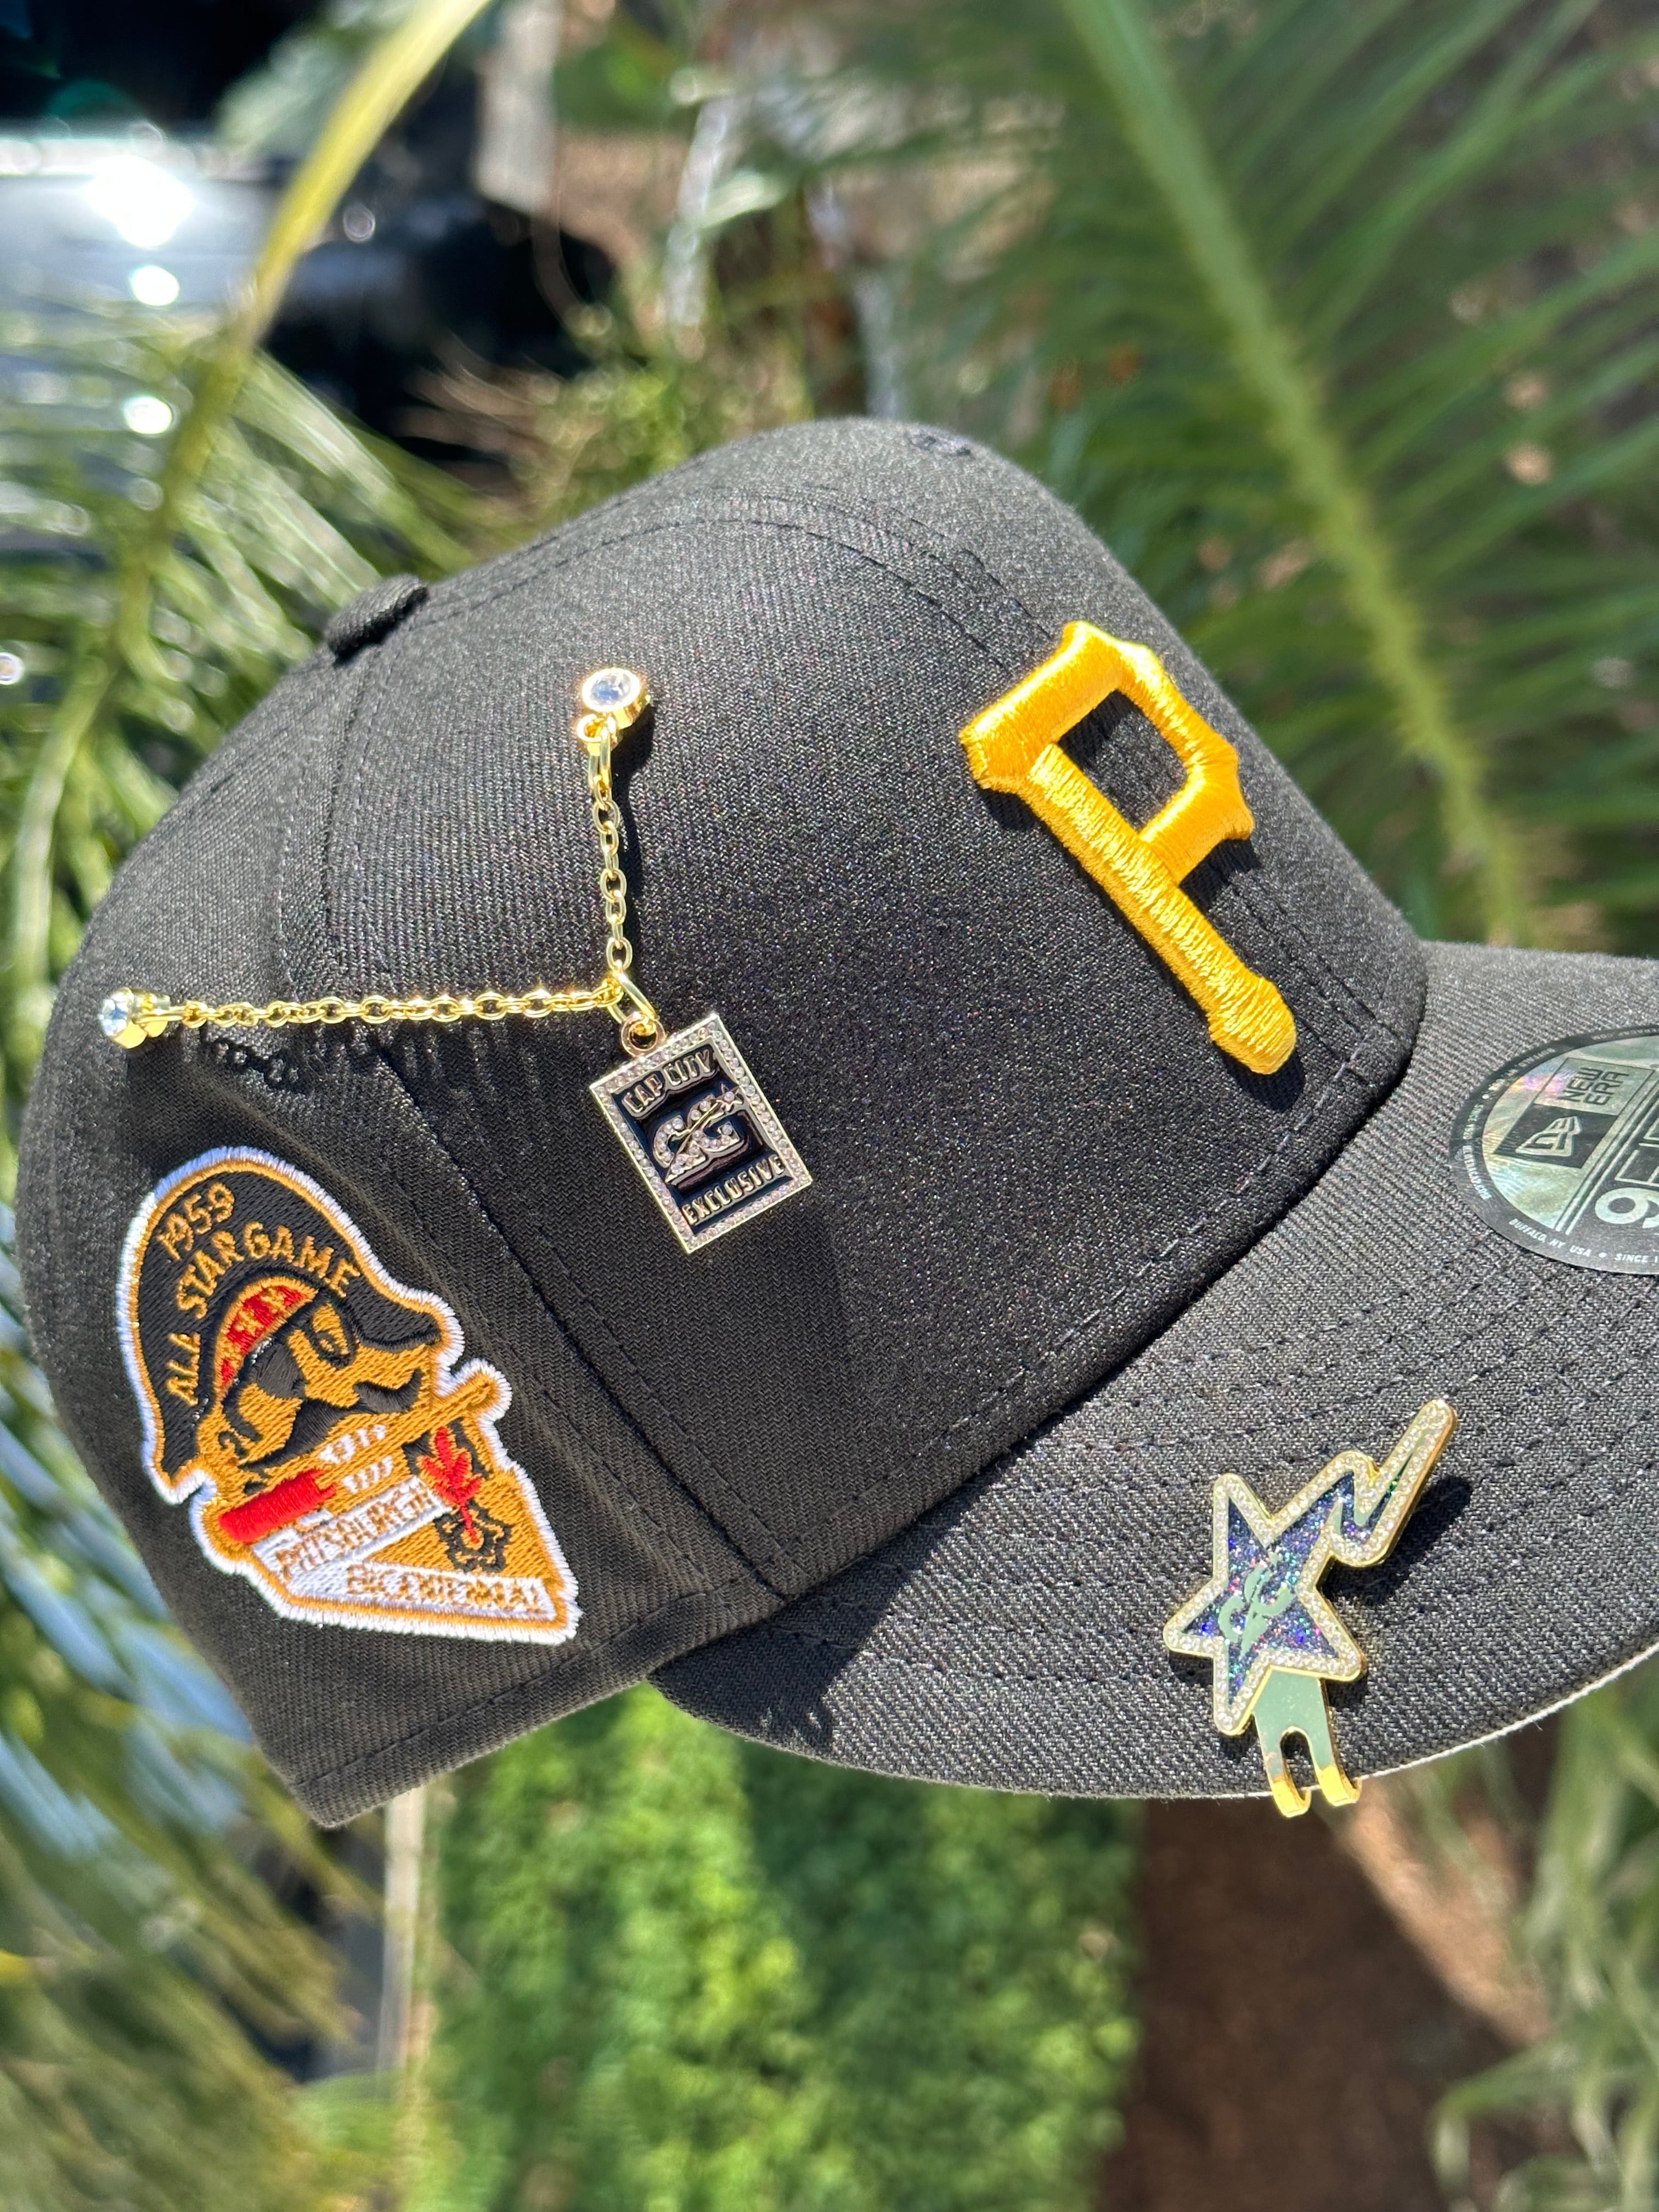 NEW ERA EXCLUSIVE 9FIFTY BLACK PITTSBURGH PIRATES SNAPBACK W/ 1959 ALL STAR GAME SIDE PATCH